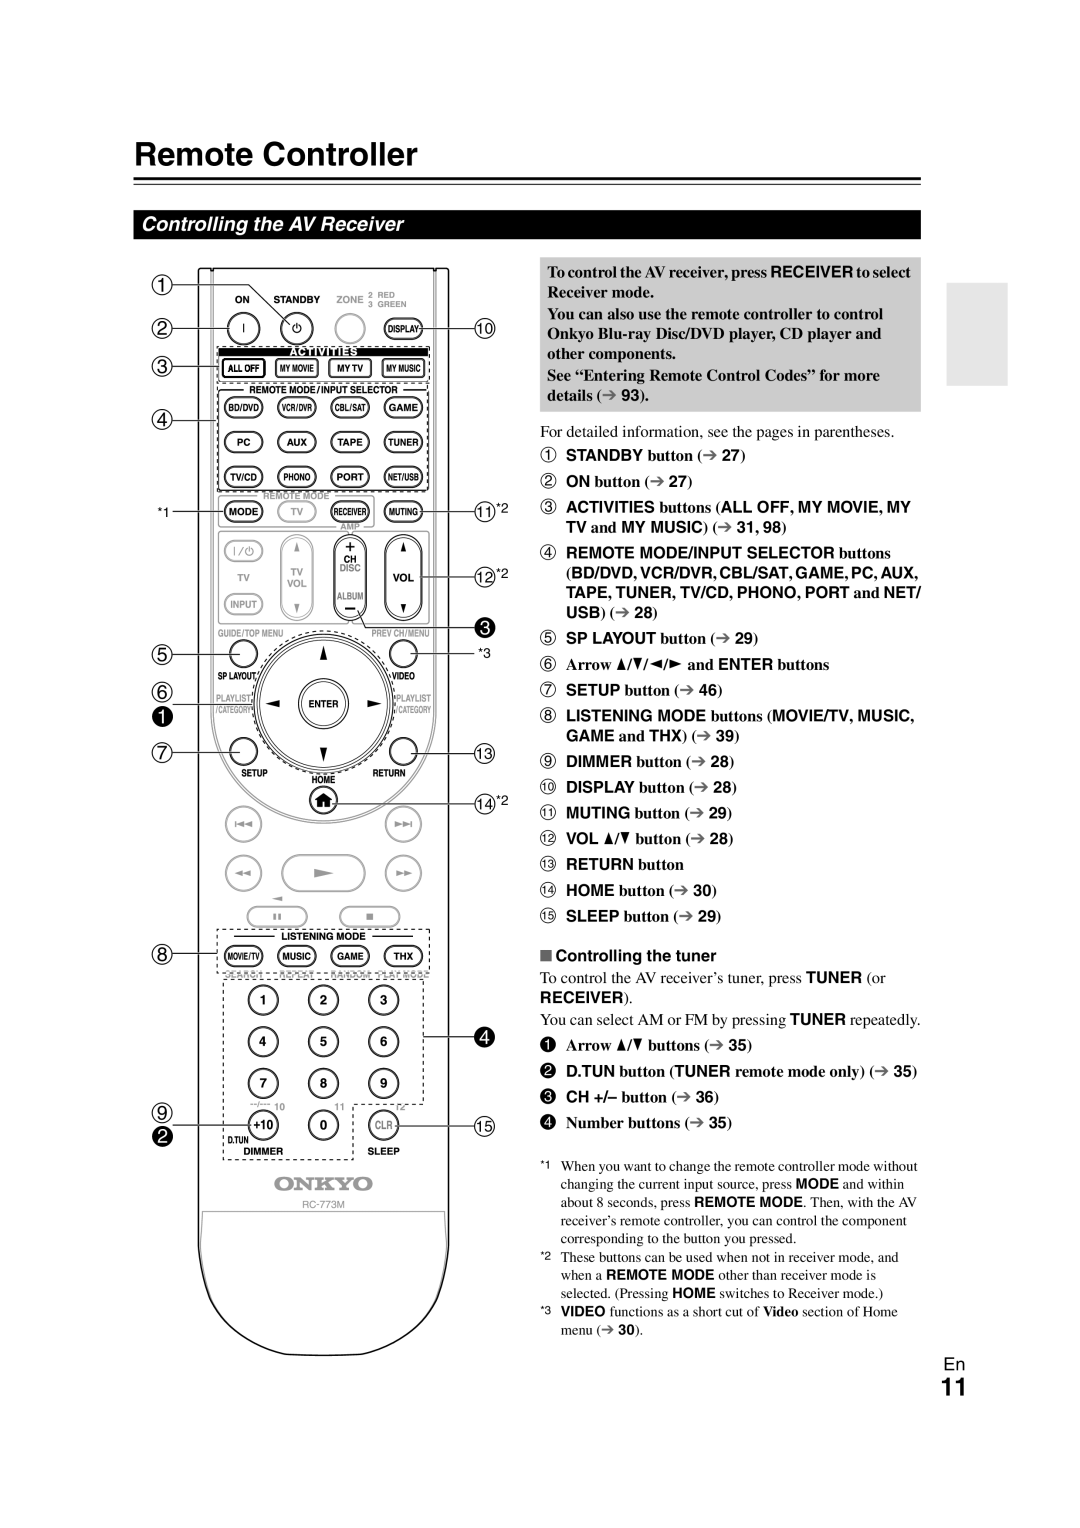 Onkyo TX-NR3008 Remote Controller, Controlling the AV Receiver, a bj c d, f a gm, h d i bo, aSTANDBY button 